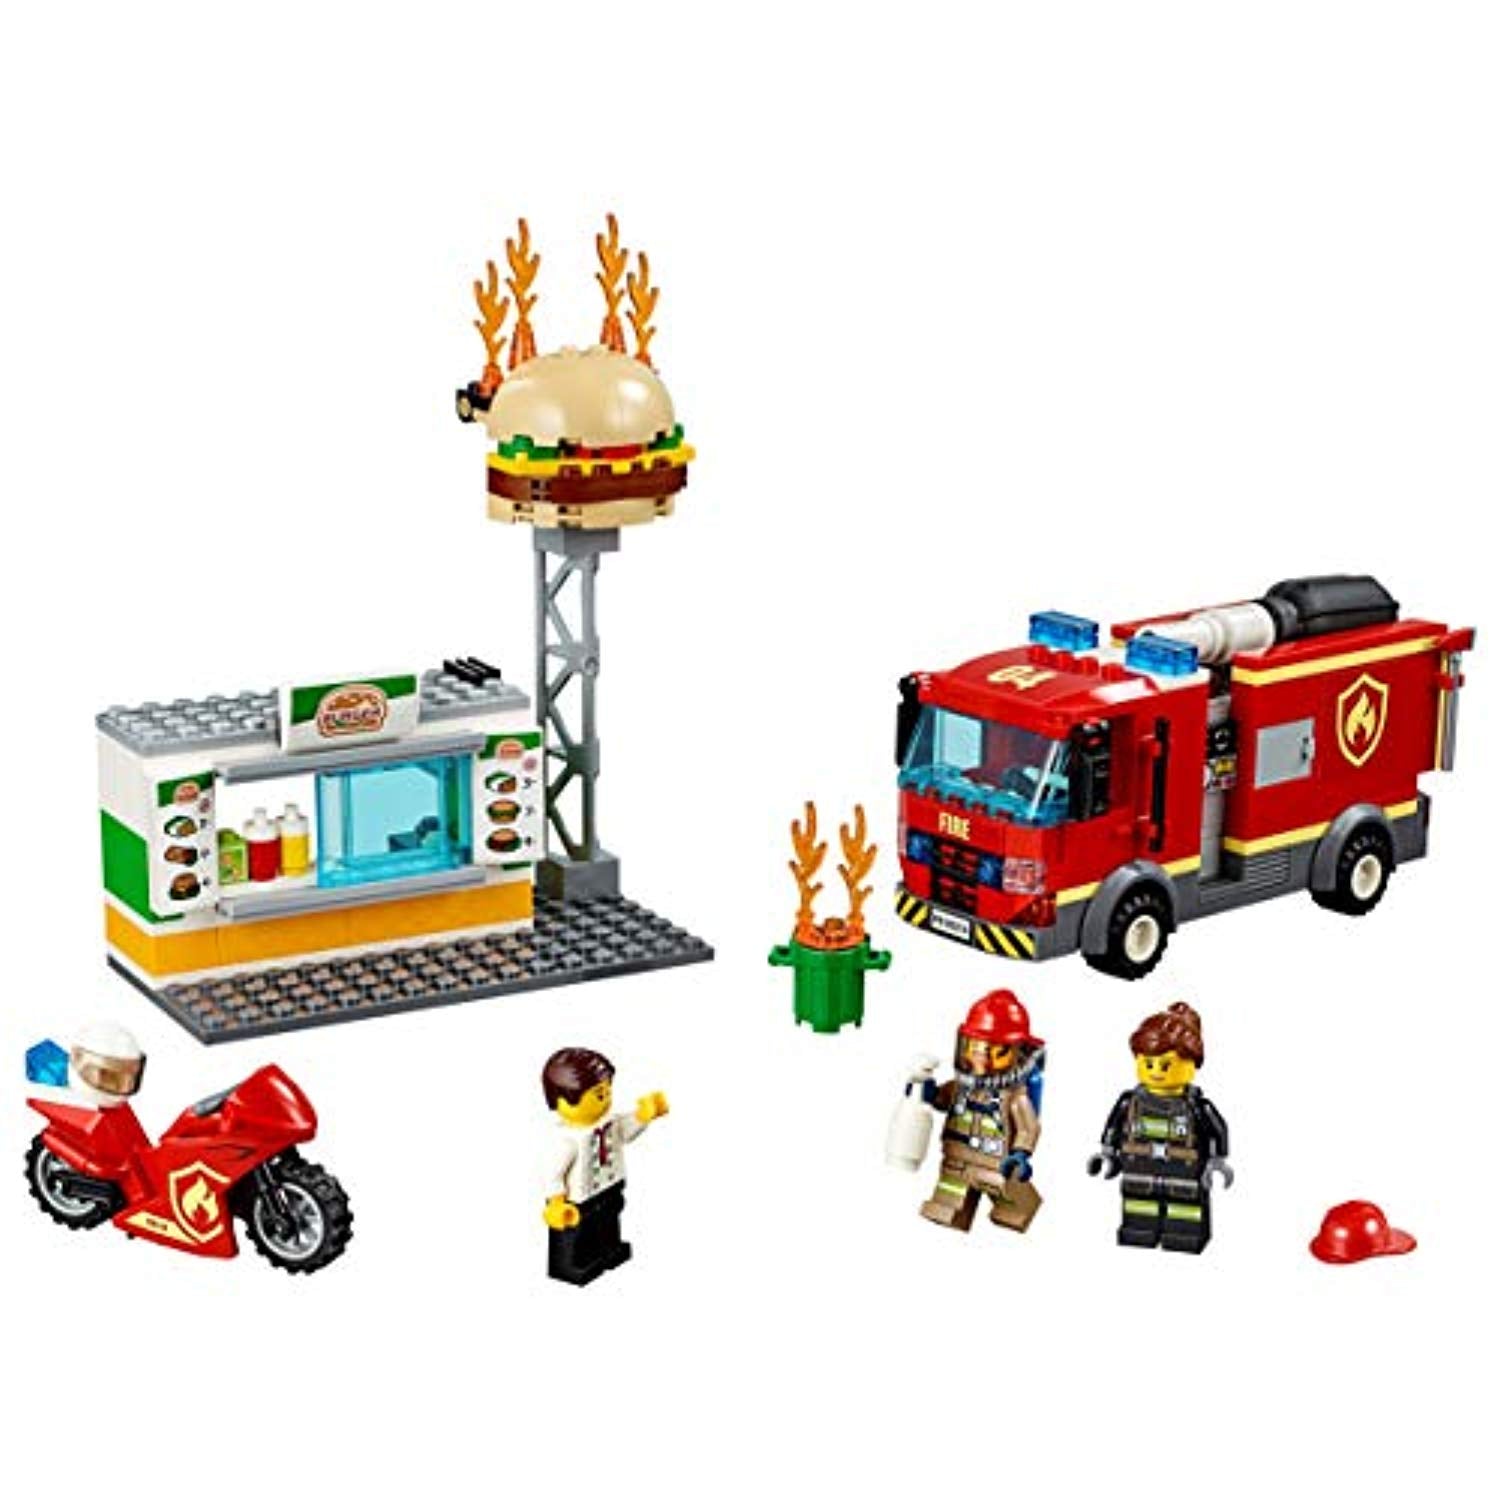 LEGO 60214 City Fire Burger Bar Fire Rescue Building Set with Fire Engine Truck and Motorbike Toy Vehicles, Fireman Minifigure and Fire Response Unit Accessories - Offer Games